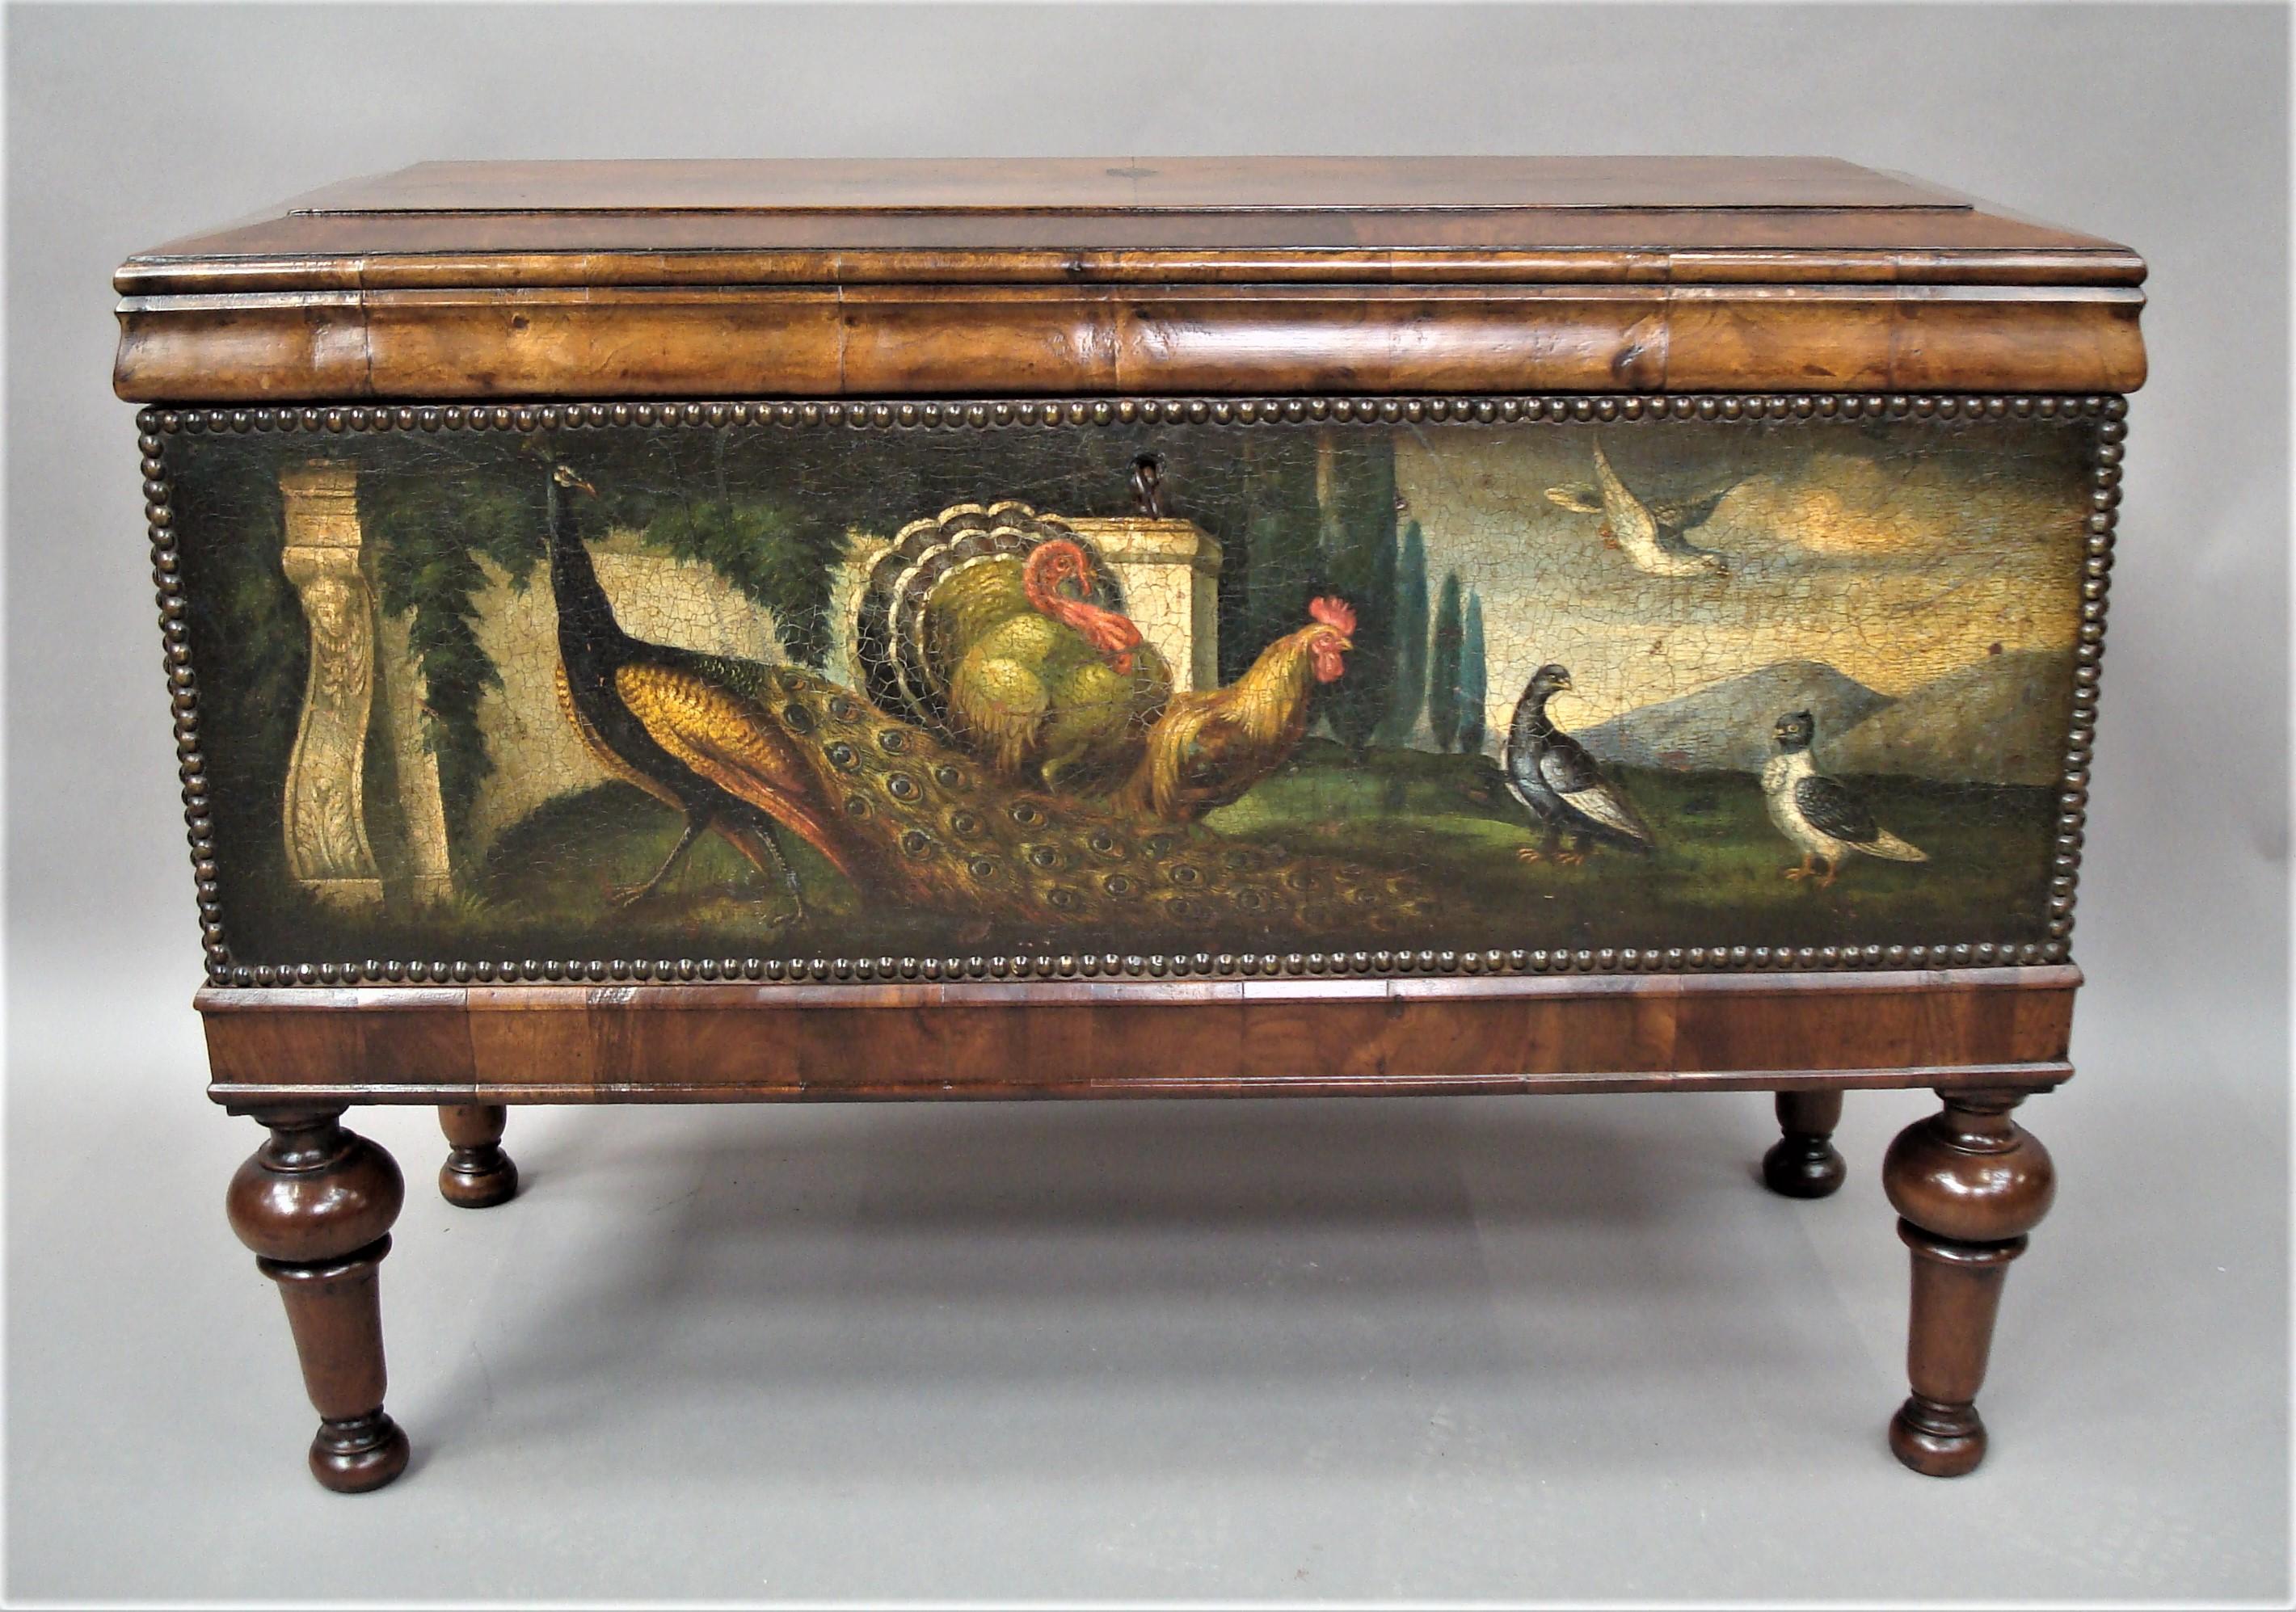 Impressive 19th century Dutch walnut and painted leather chest on stand; the well figured walnut lid with bookmatched raised panel top and wide crossbanded chamfered border above a bold gross grained ogee moulded frieze; the impressive oil painted